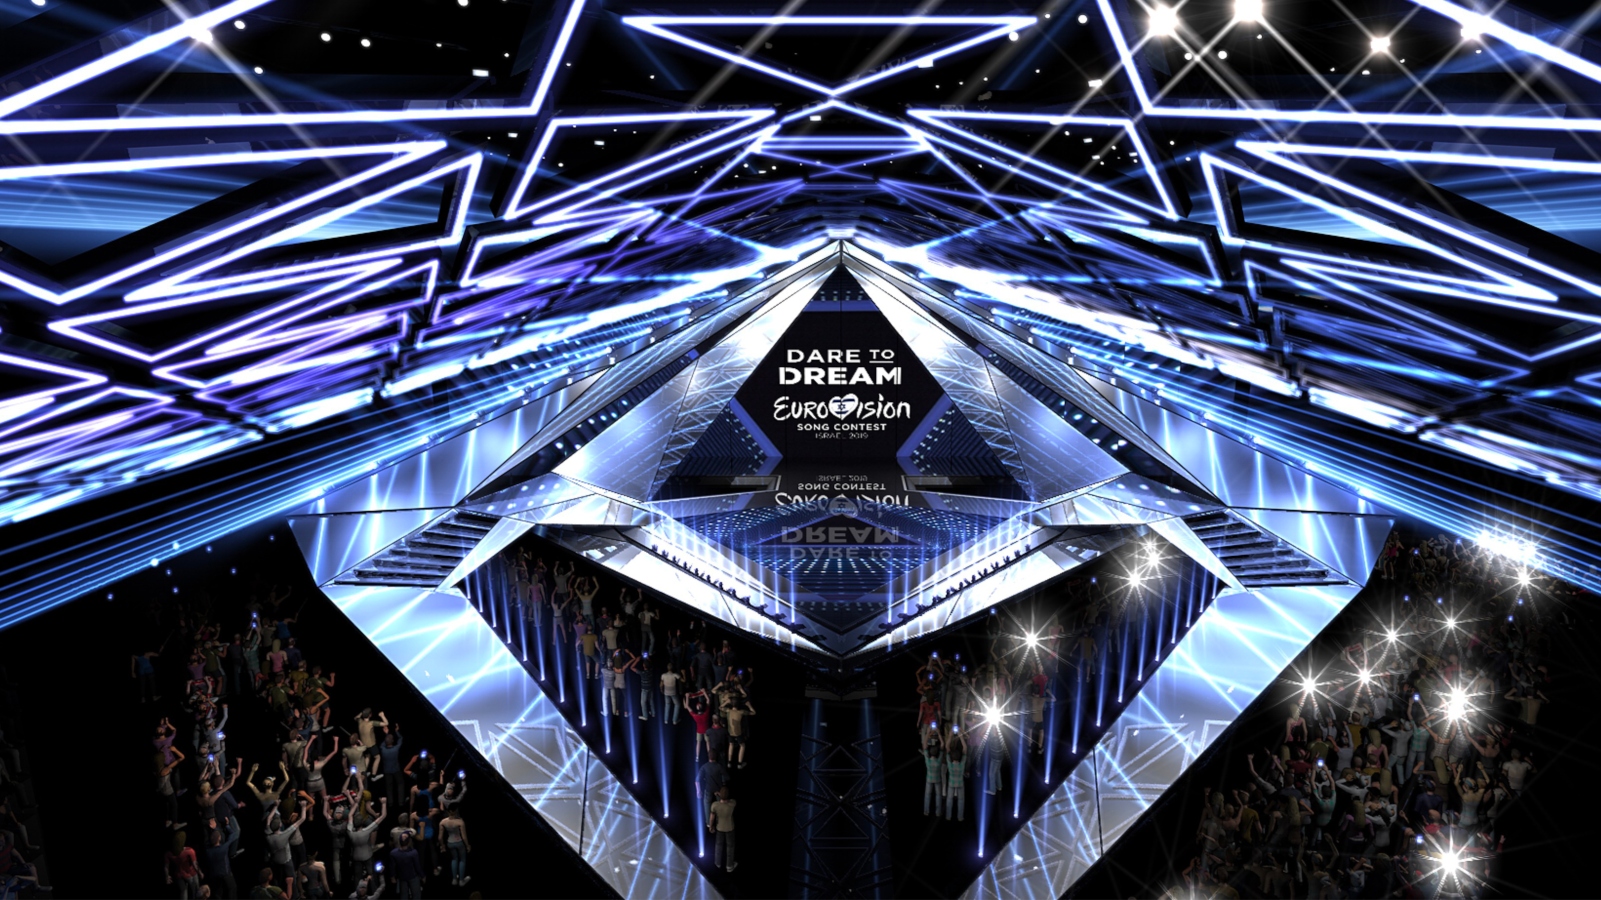 This is a rendering of the 2019 Eurovision Song Contest stage at Expo Tel Aviv, as designed by Florian Wieder. Image courtesy of Eurovision